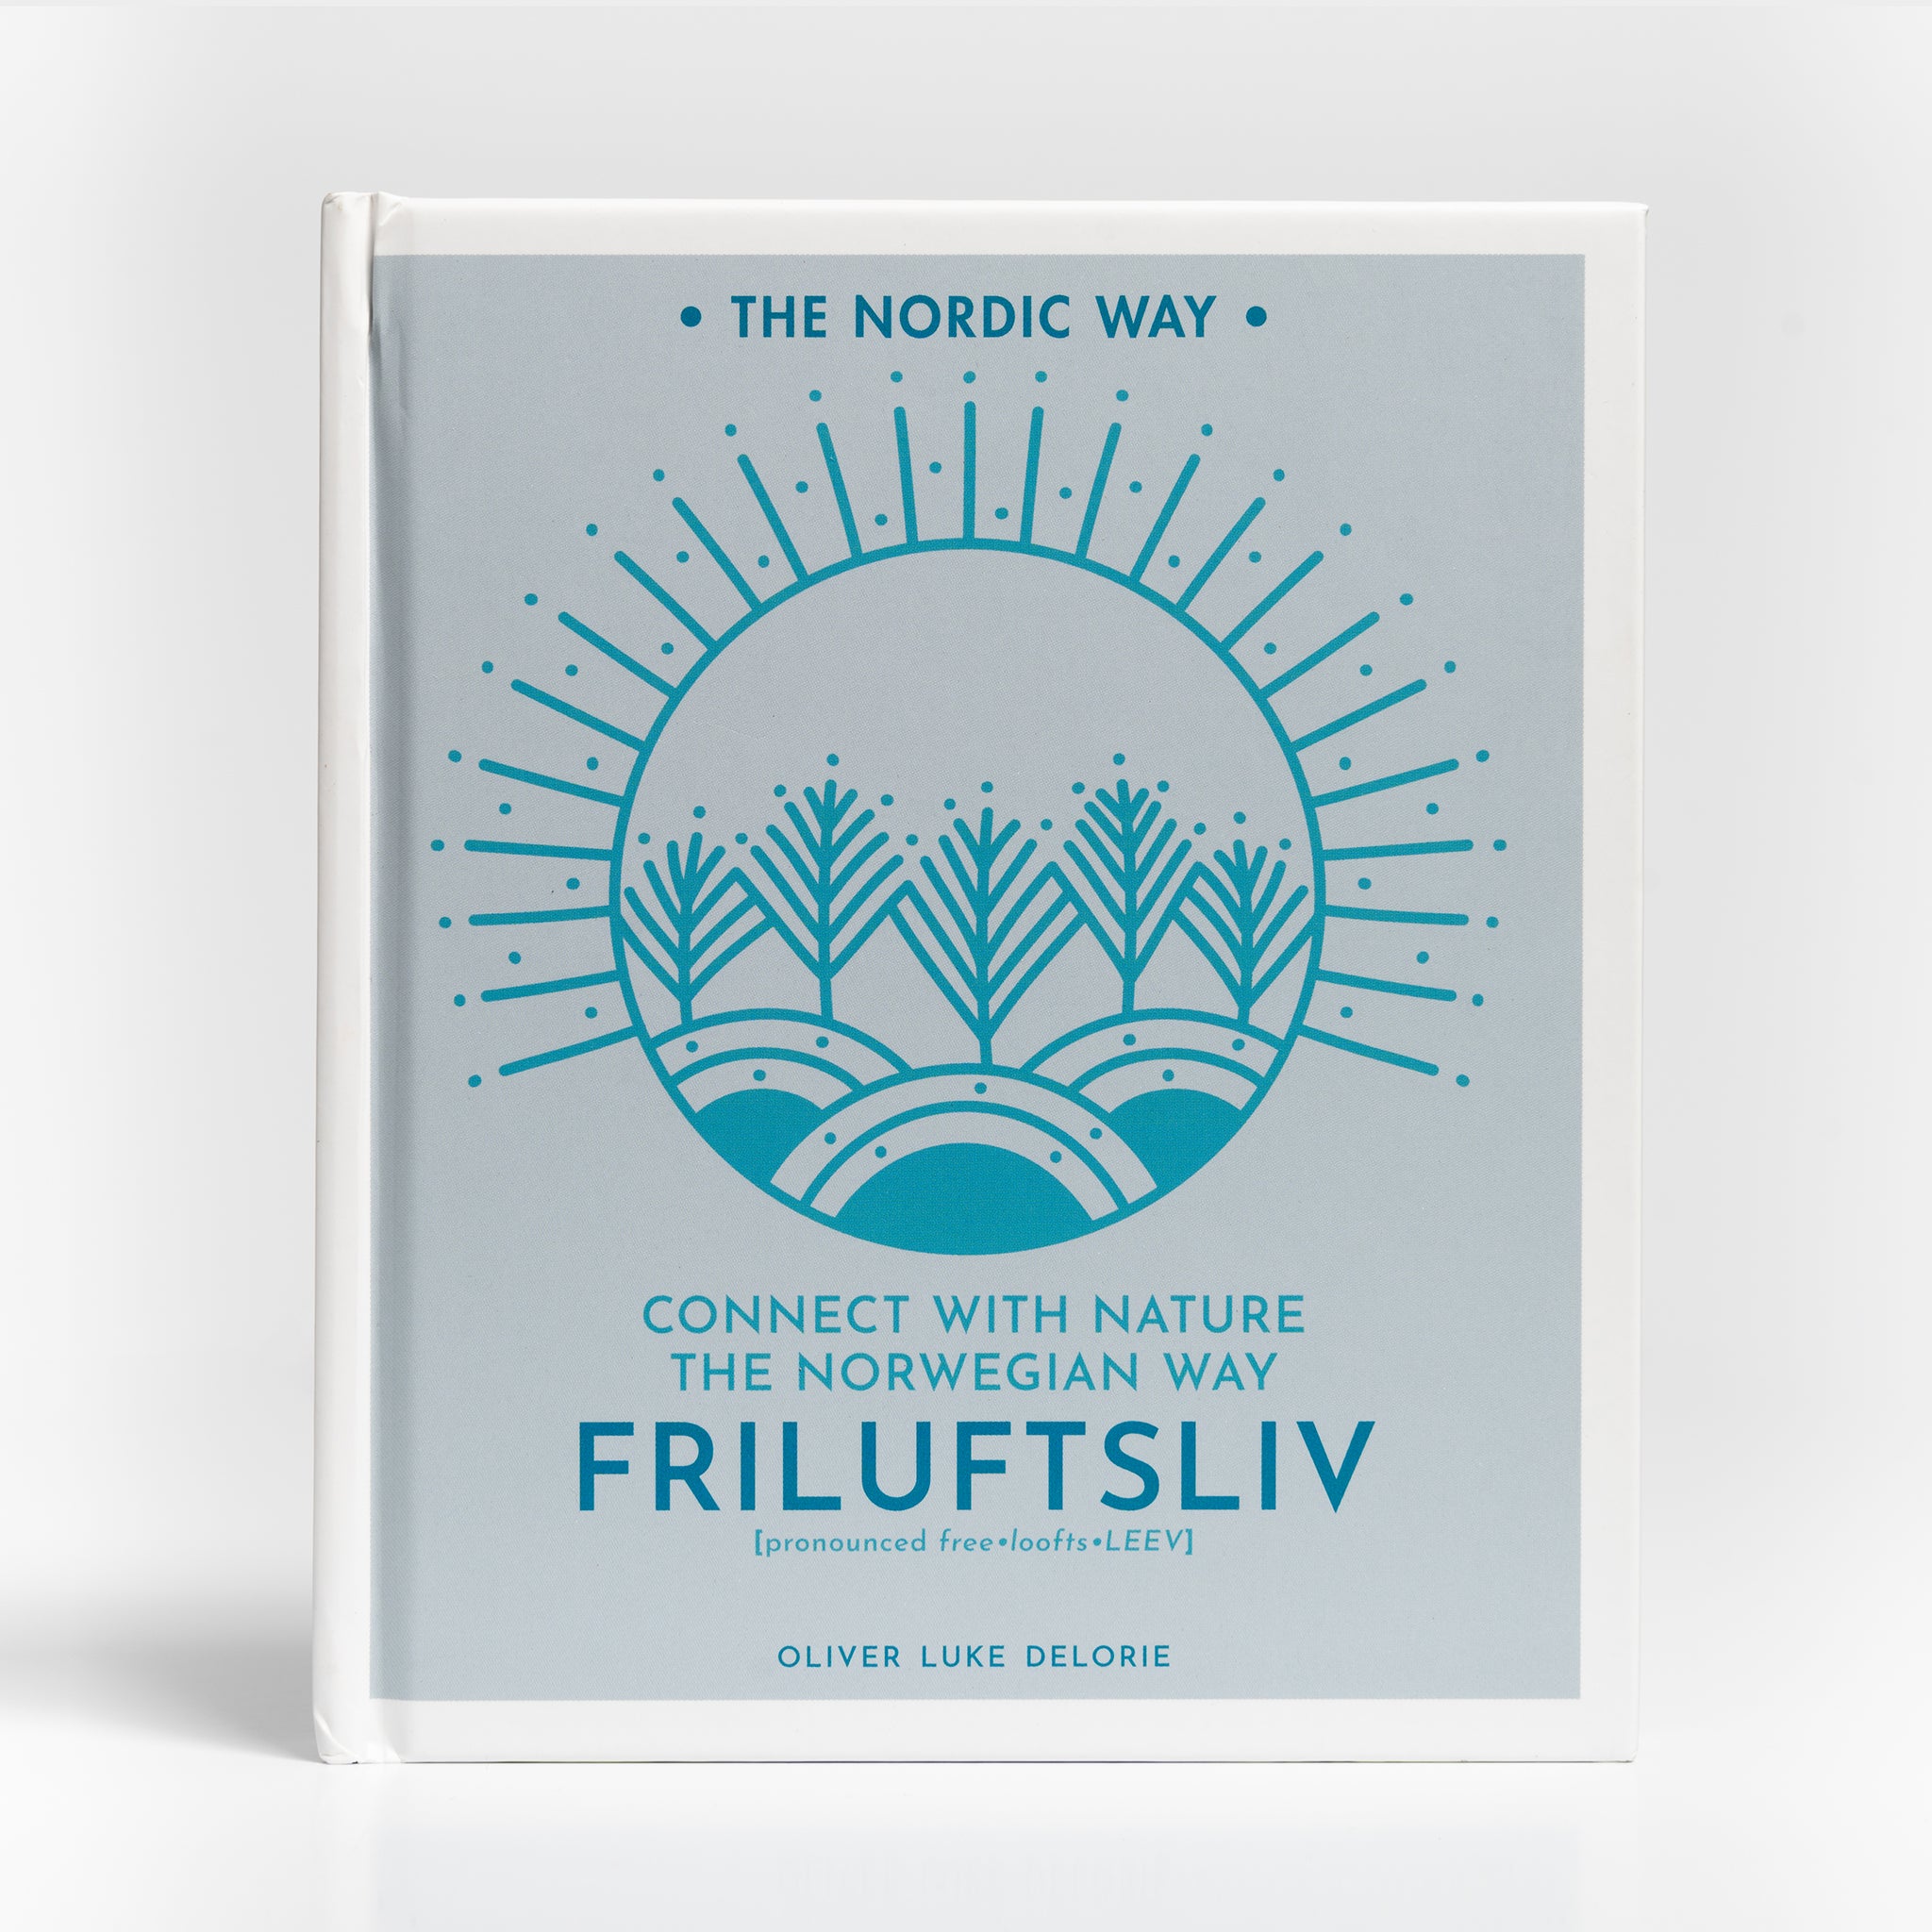 Friluftsliv: Connect with Nature the Norwegian Way by Oliver Luke Delorie